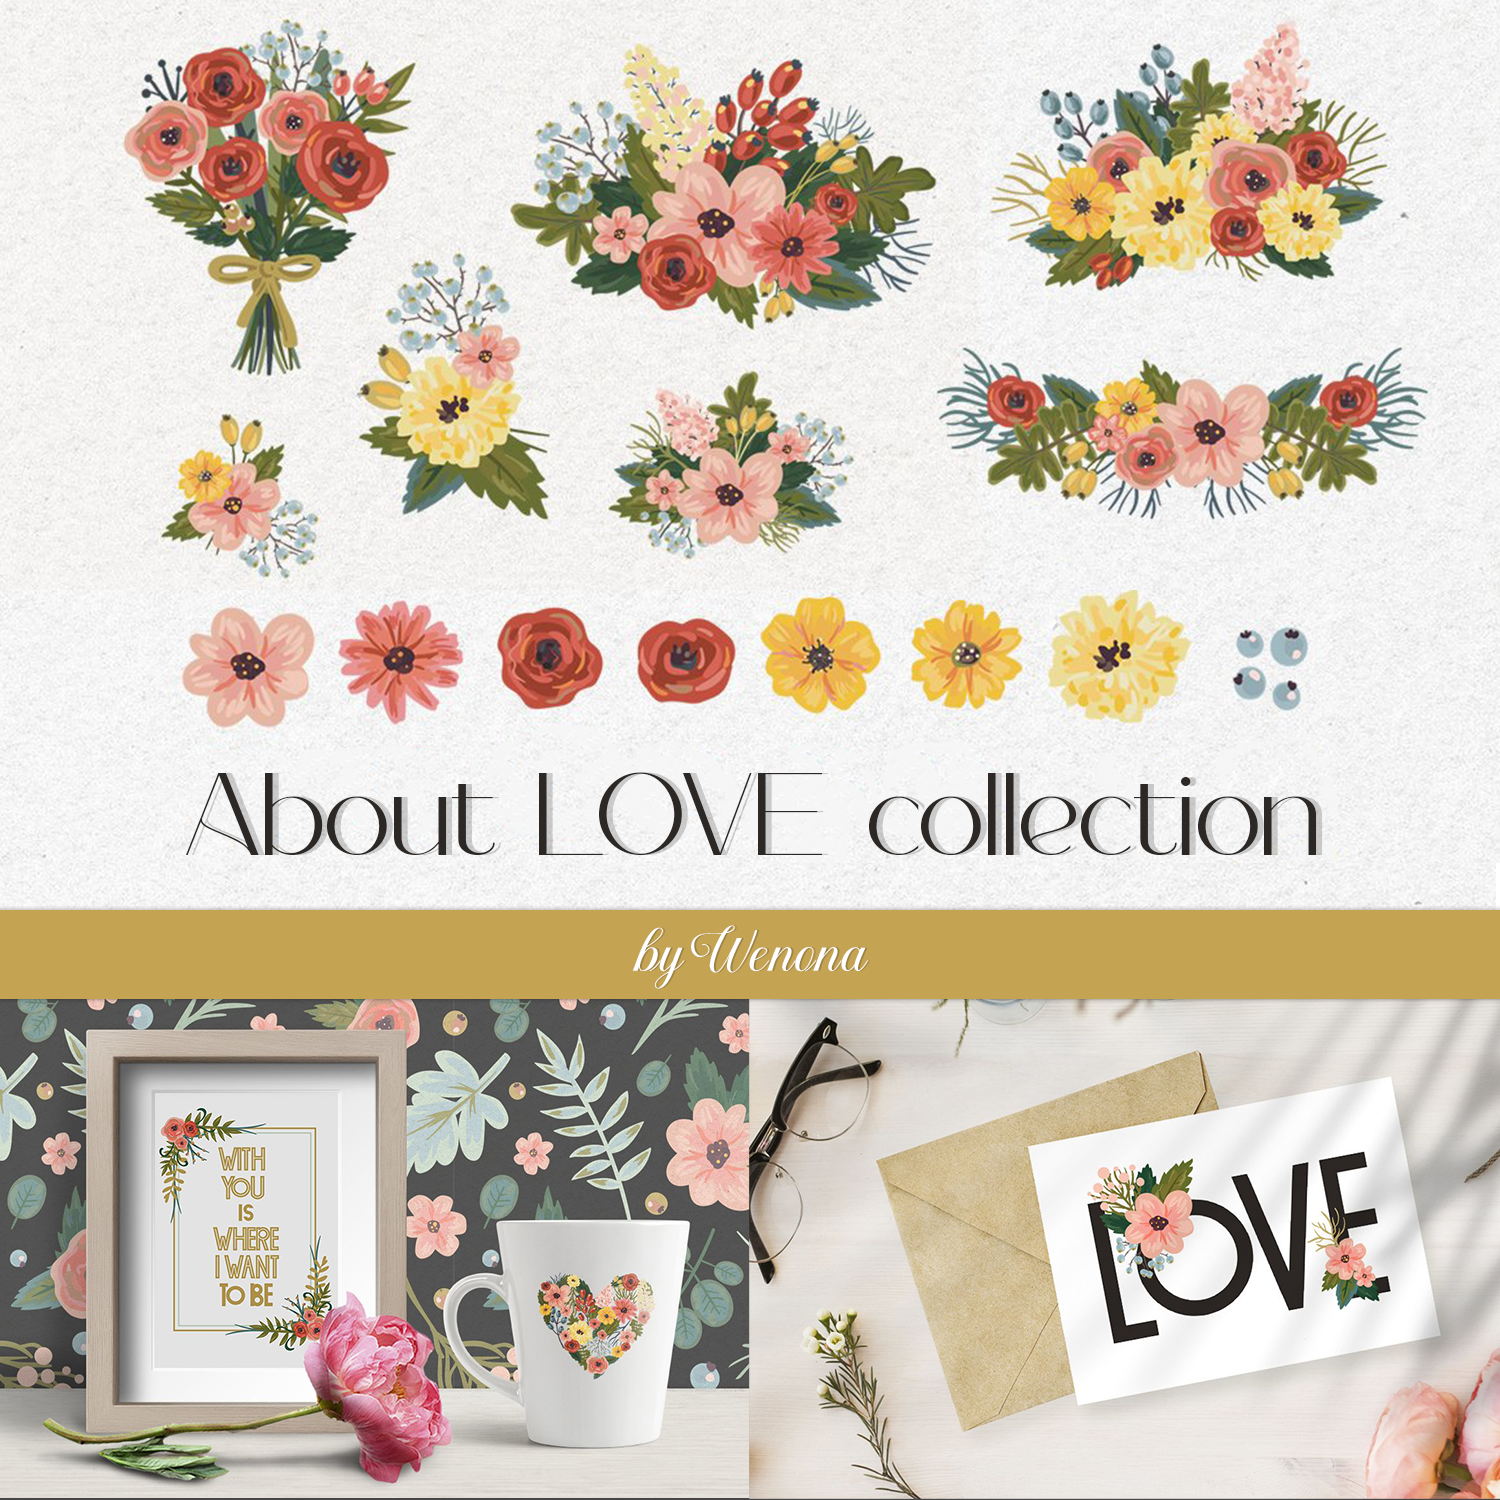 Preview about love collection.